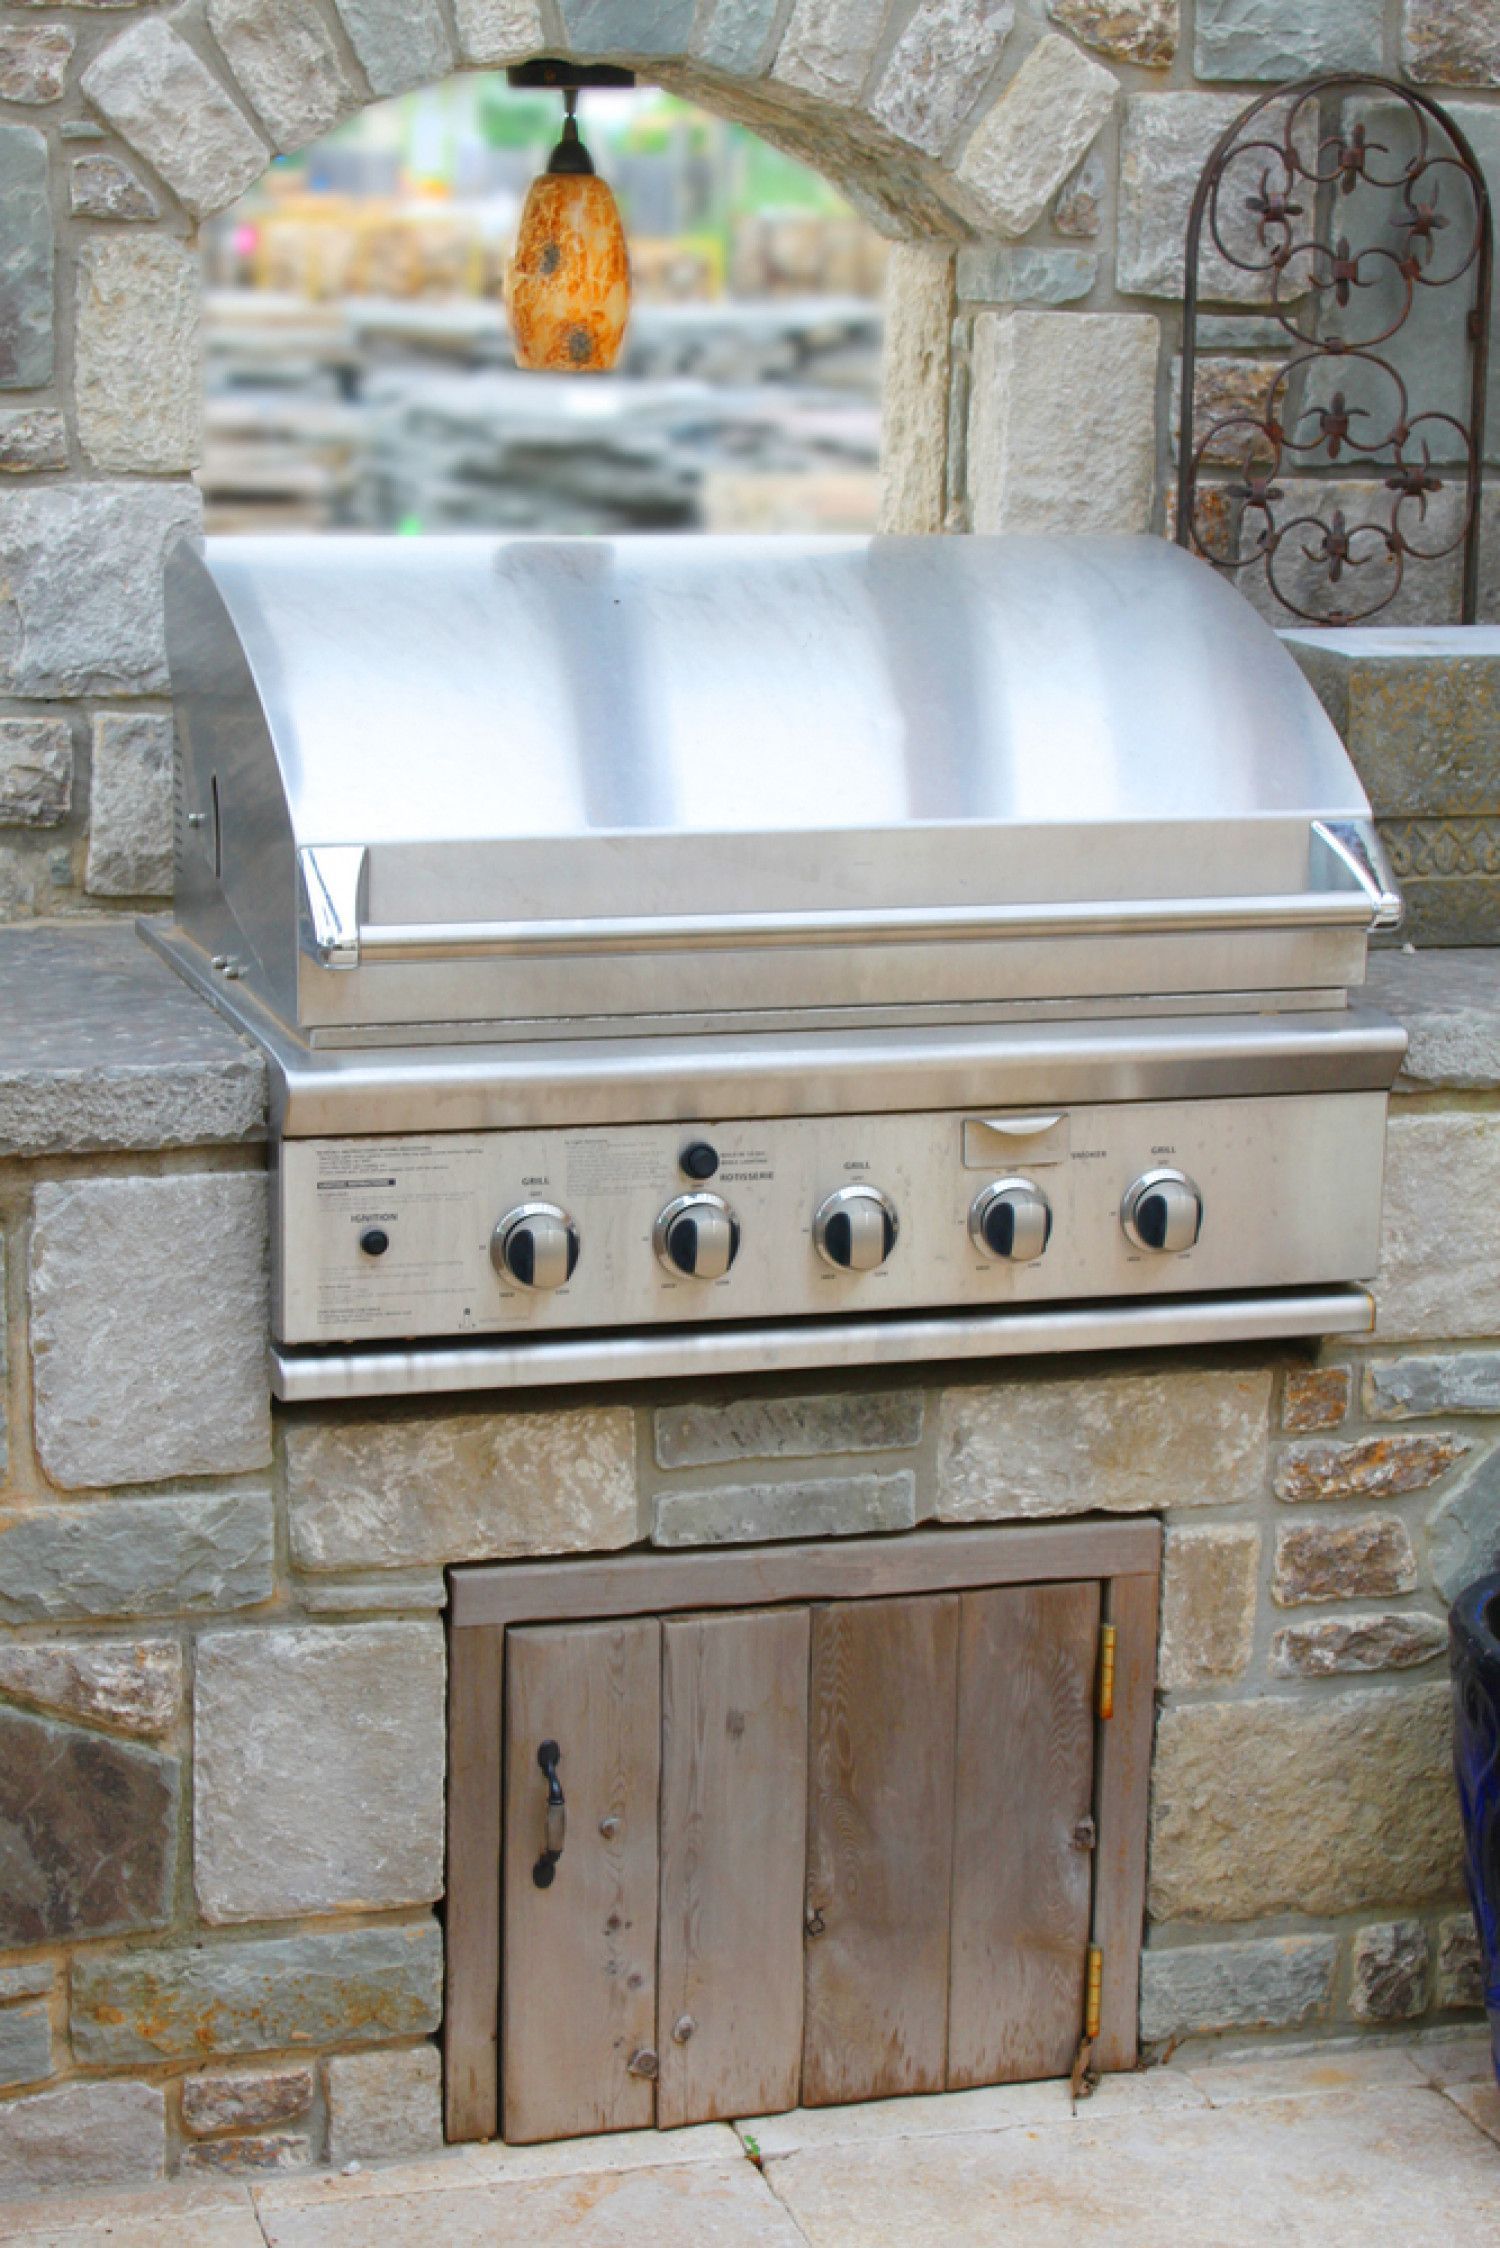 a stainless steel grill is built into a stone wall